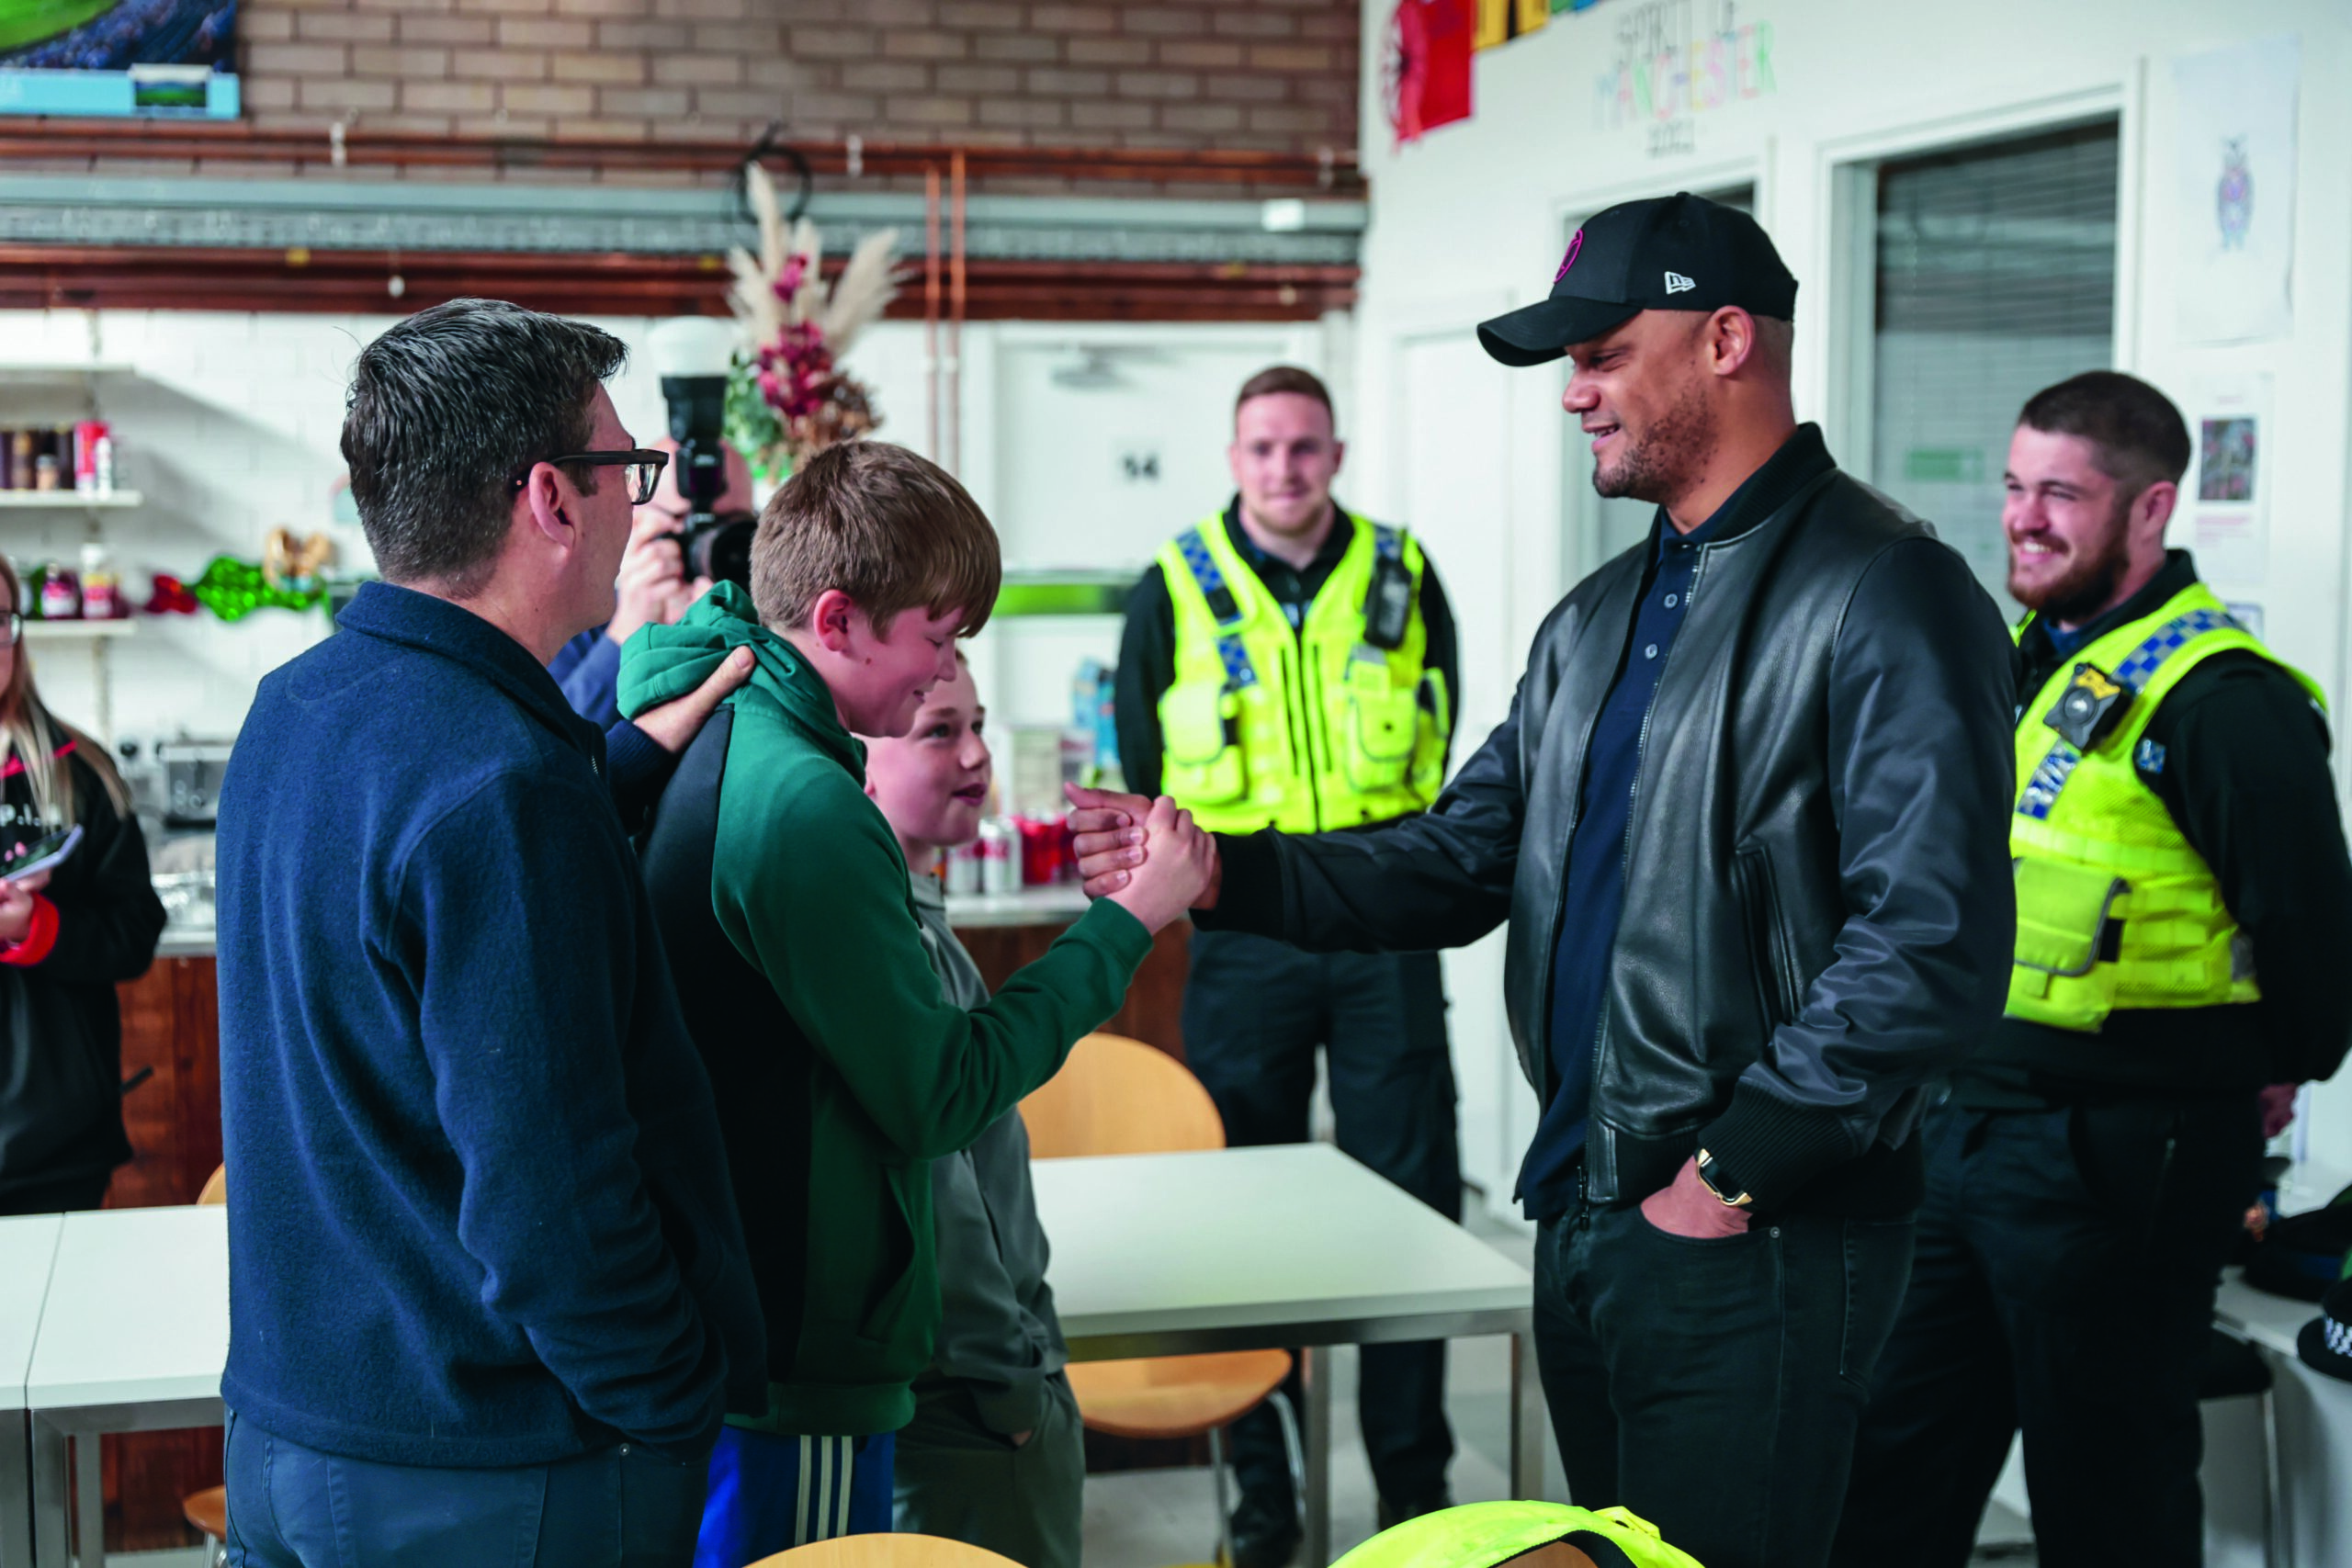 Kompany meeting residents at Spin in Manchester